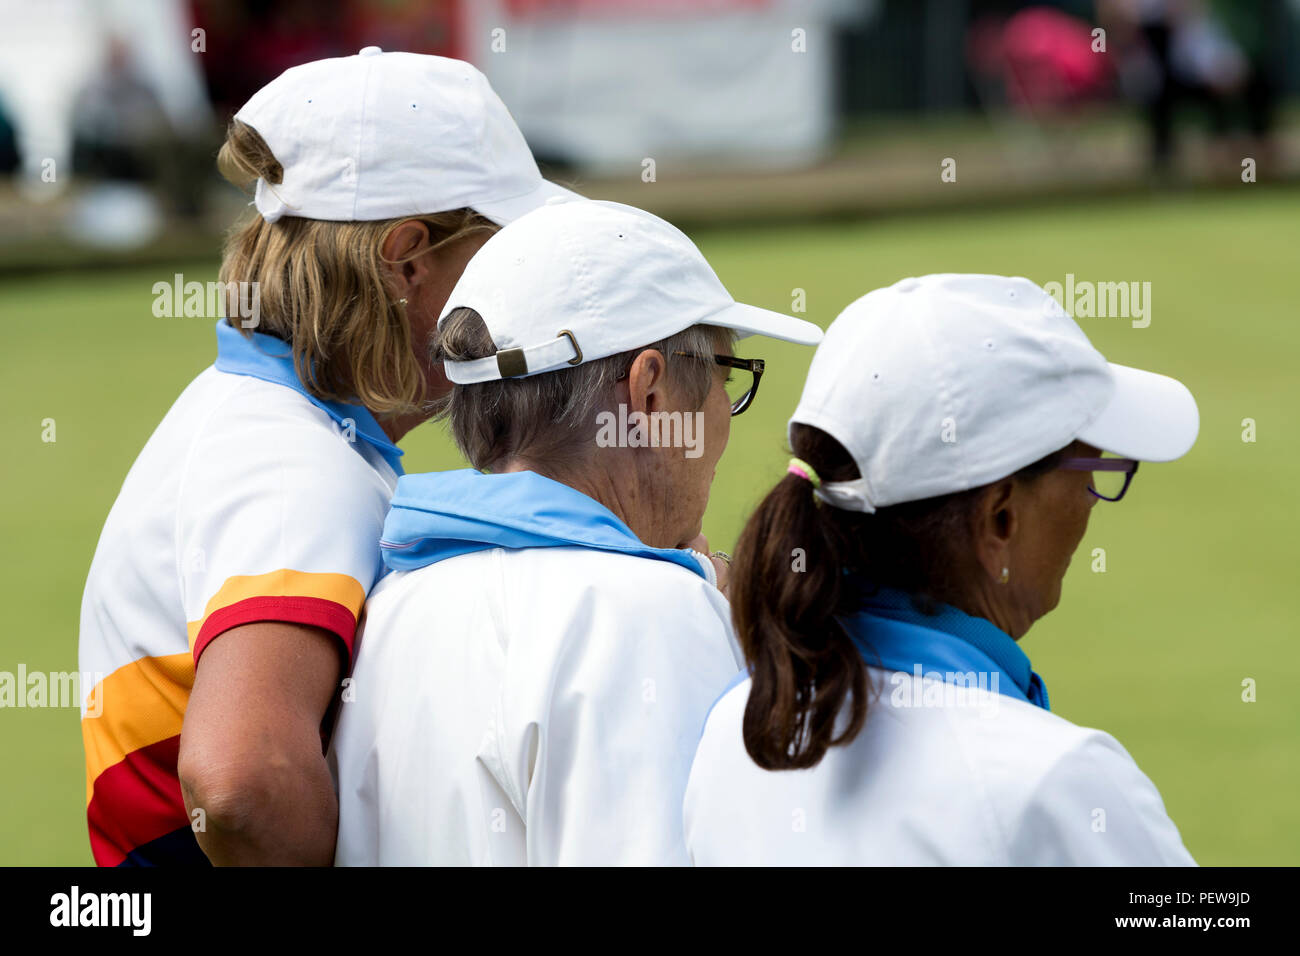 Players watching a delivery at the national women`s lawn bowls championships, Leamington Spa, UK Stock Photo